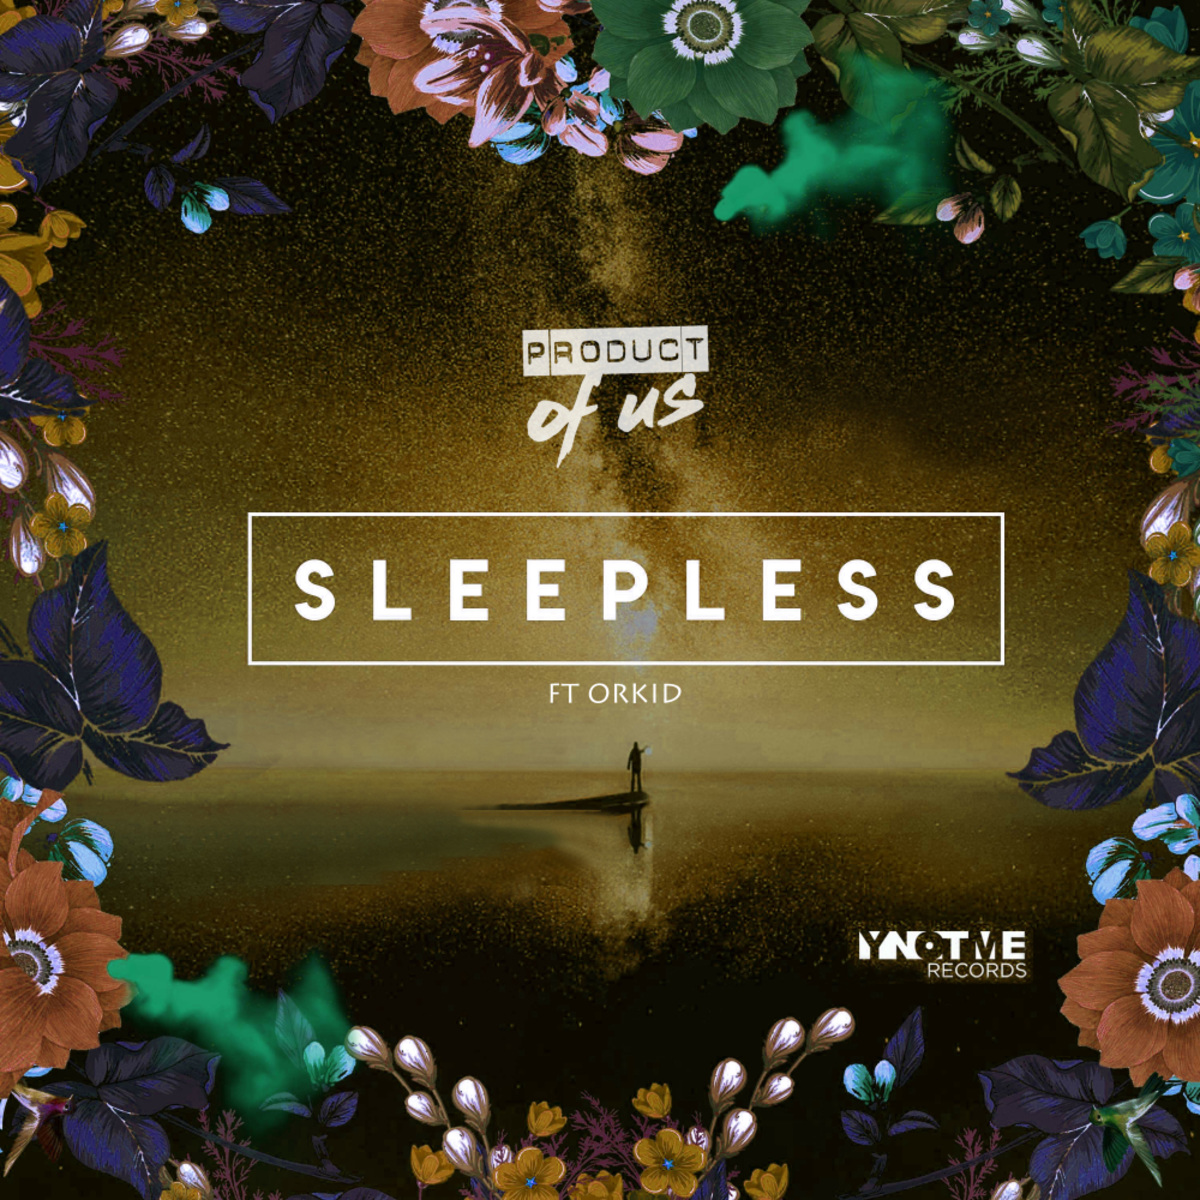 Product of us - Sleepless (Remixes) / Y Not Me Records